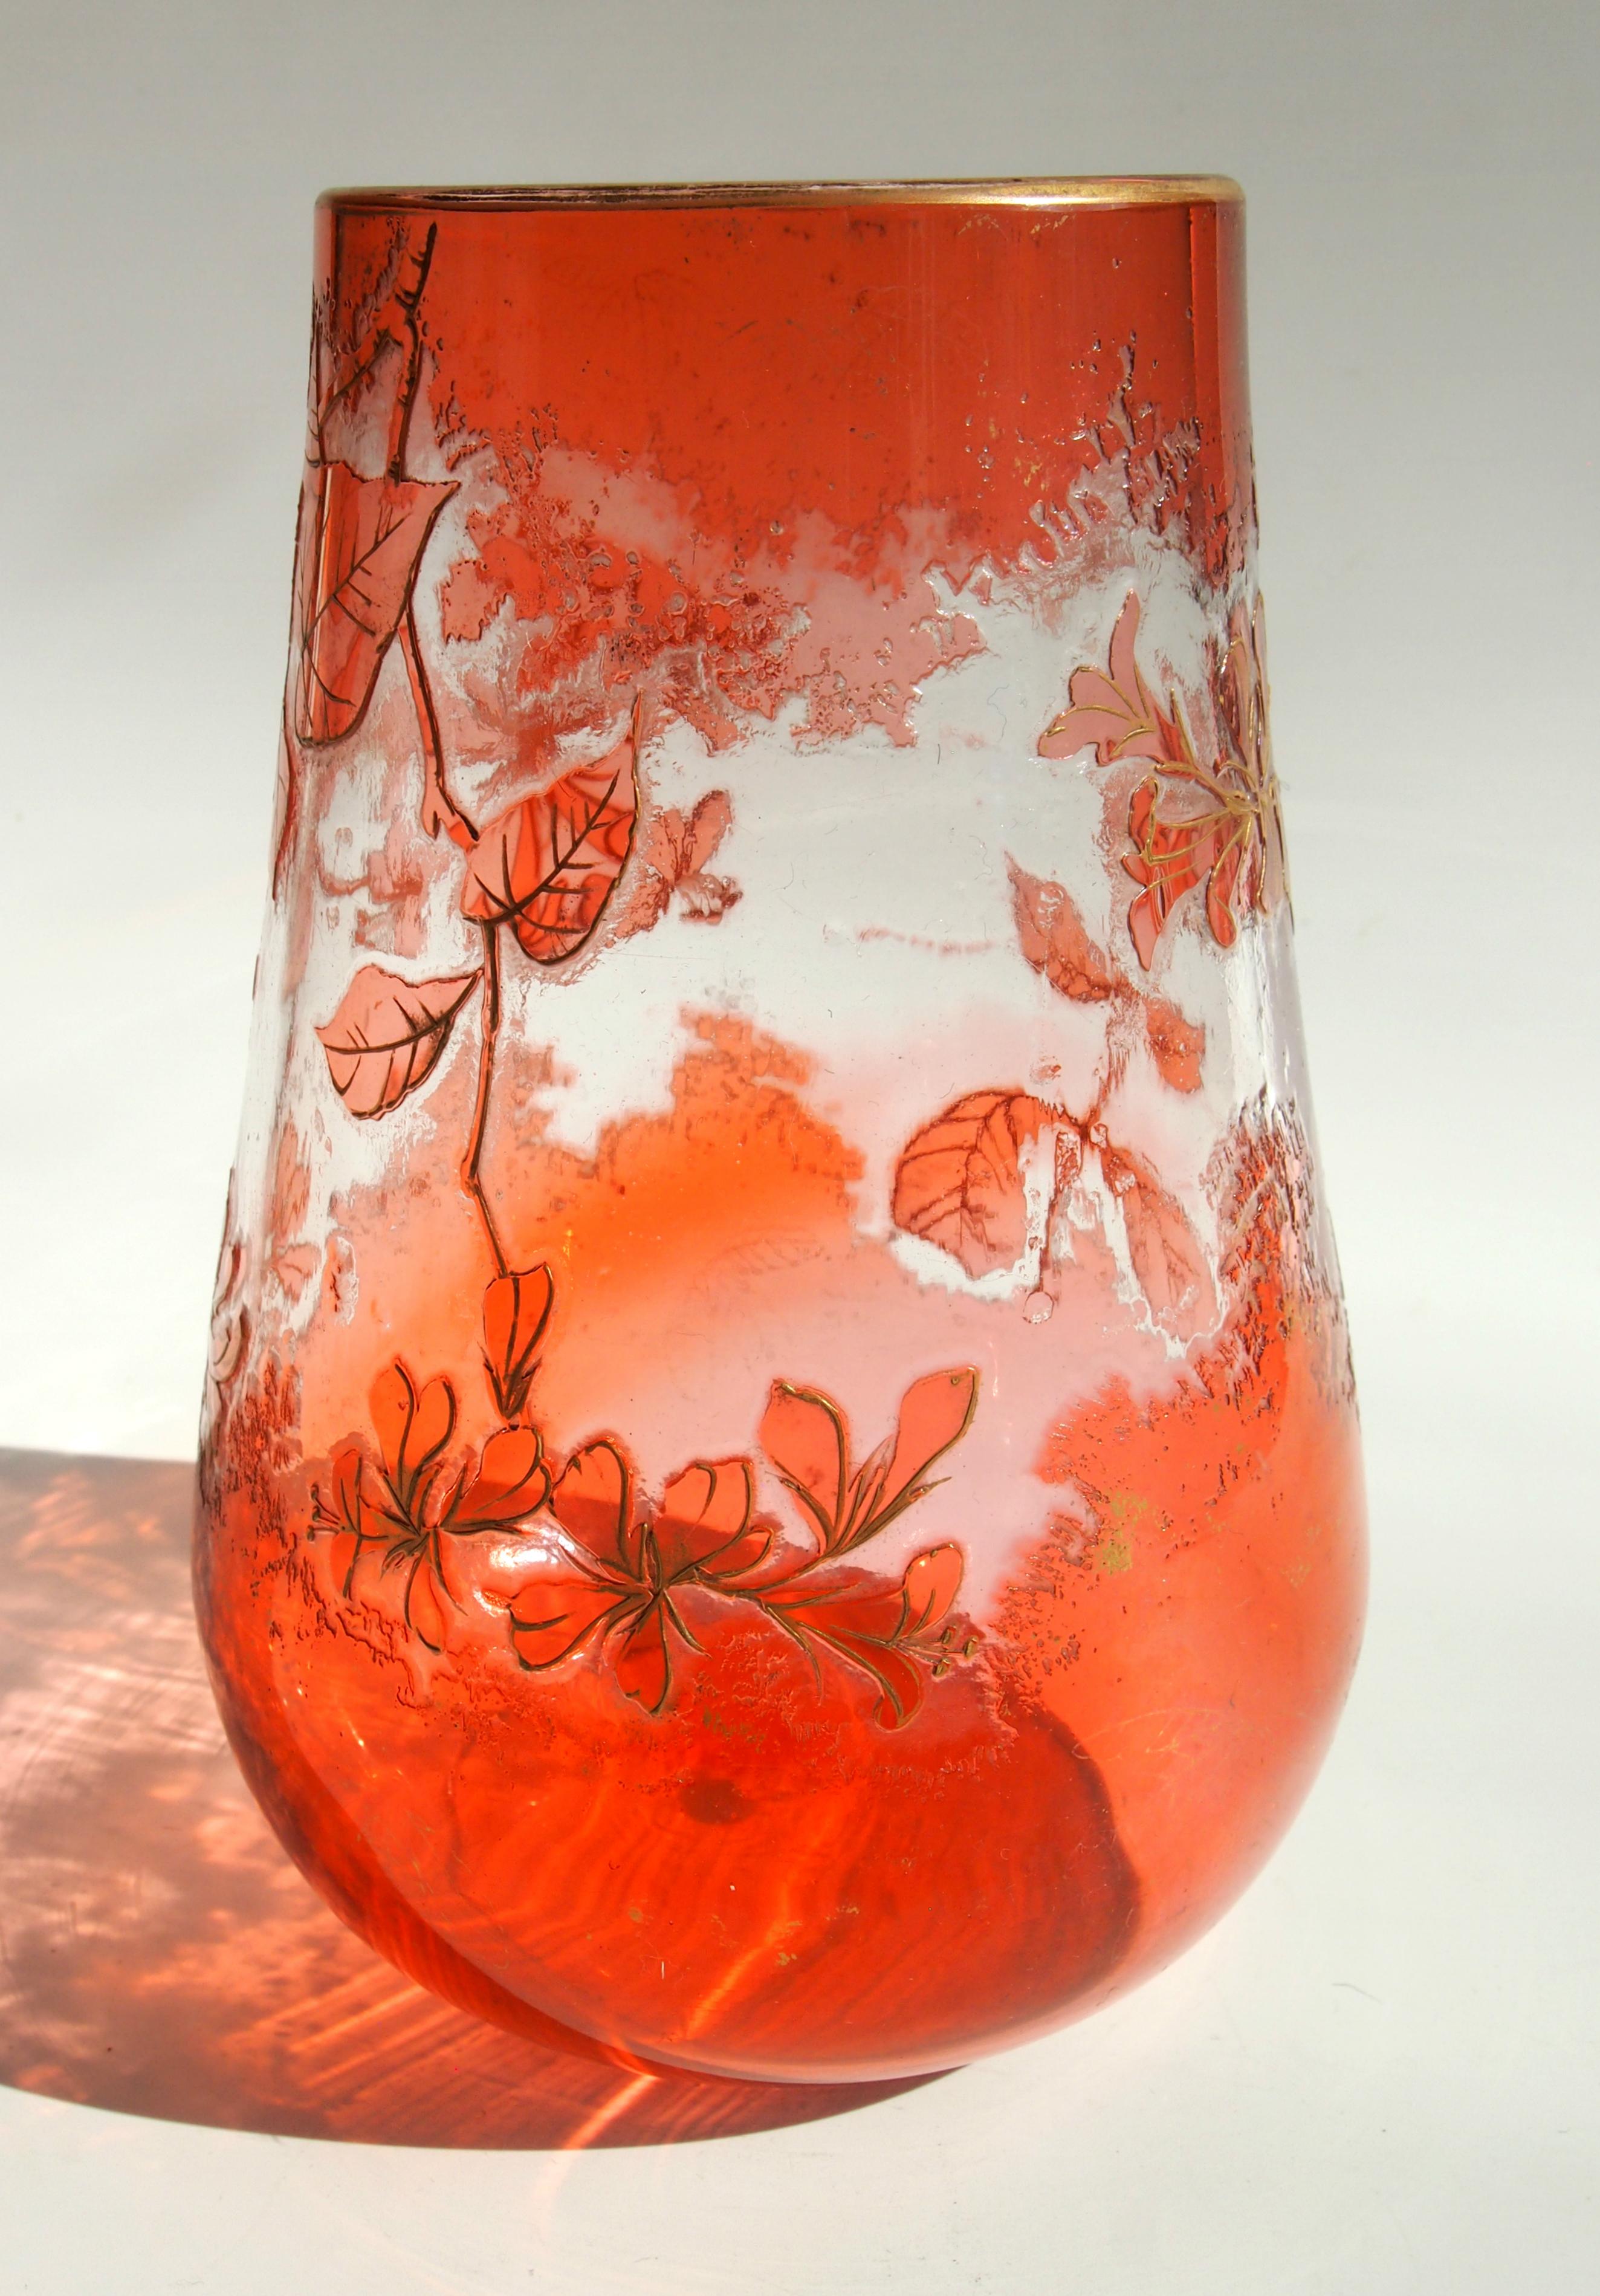 A vibrant Art Nouveau orange/pink over clear Harrach cameo vase. Depicting flowers highlighted with gilding. This style of Cameo was taken by Harrach to the 1900 Paris exhibition. Their stylized cameo technique employed an icicle effect -visible